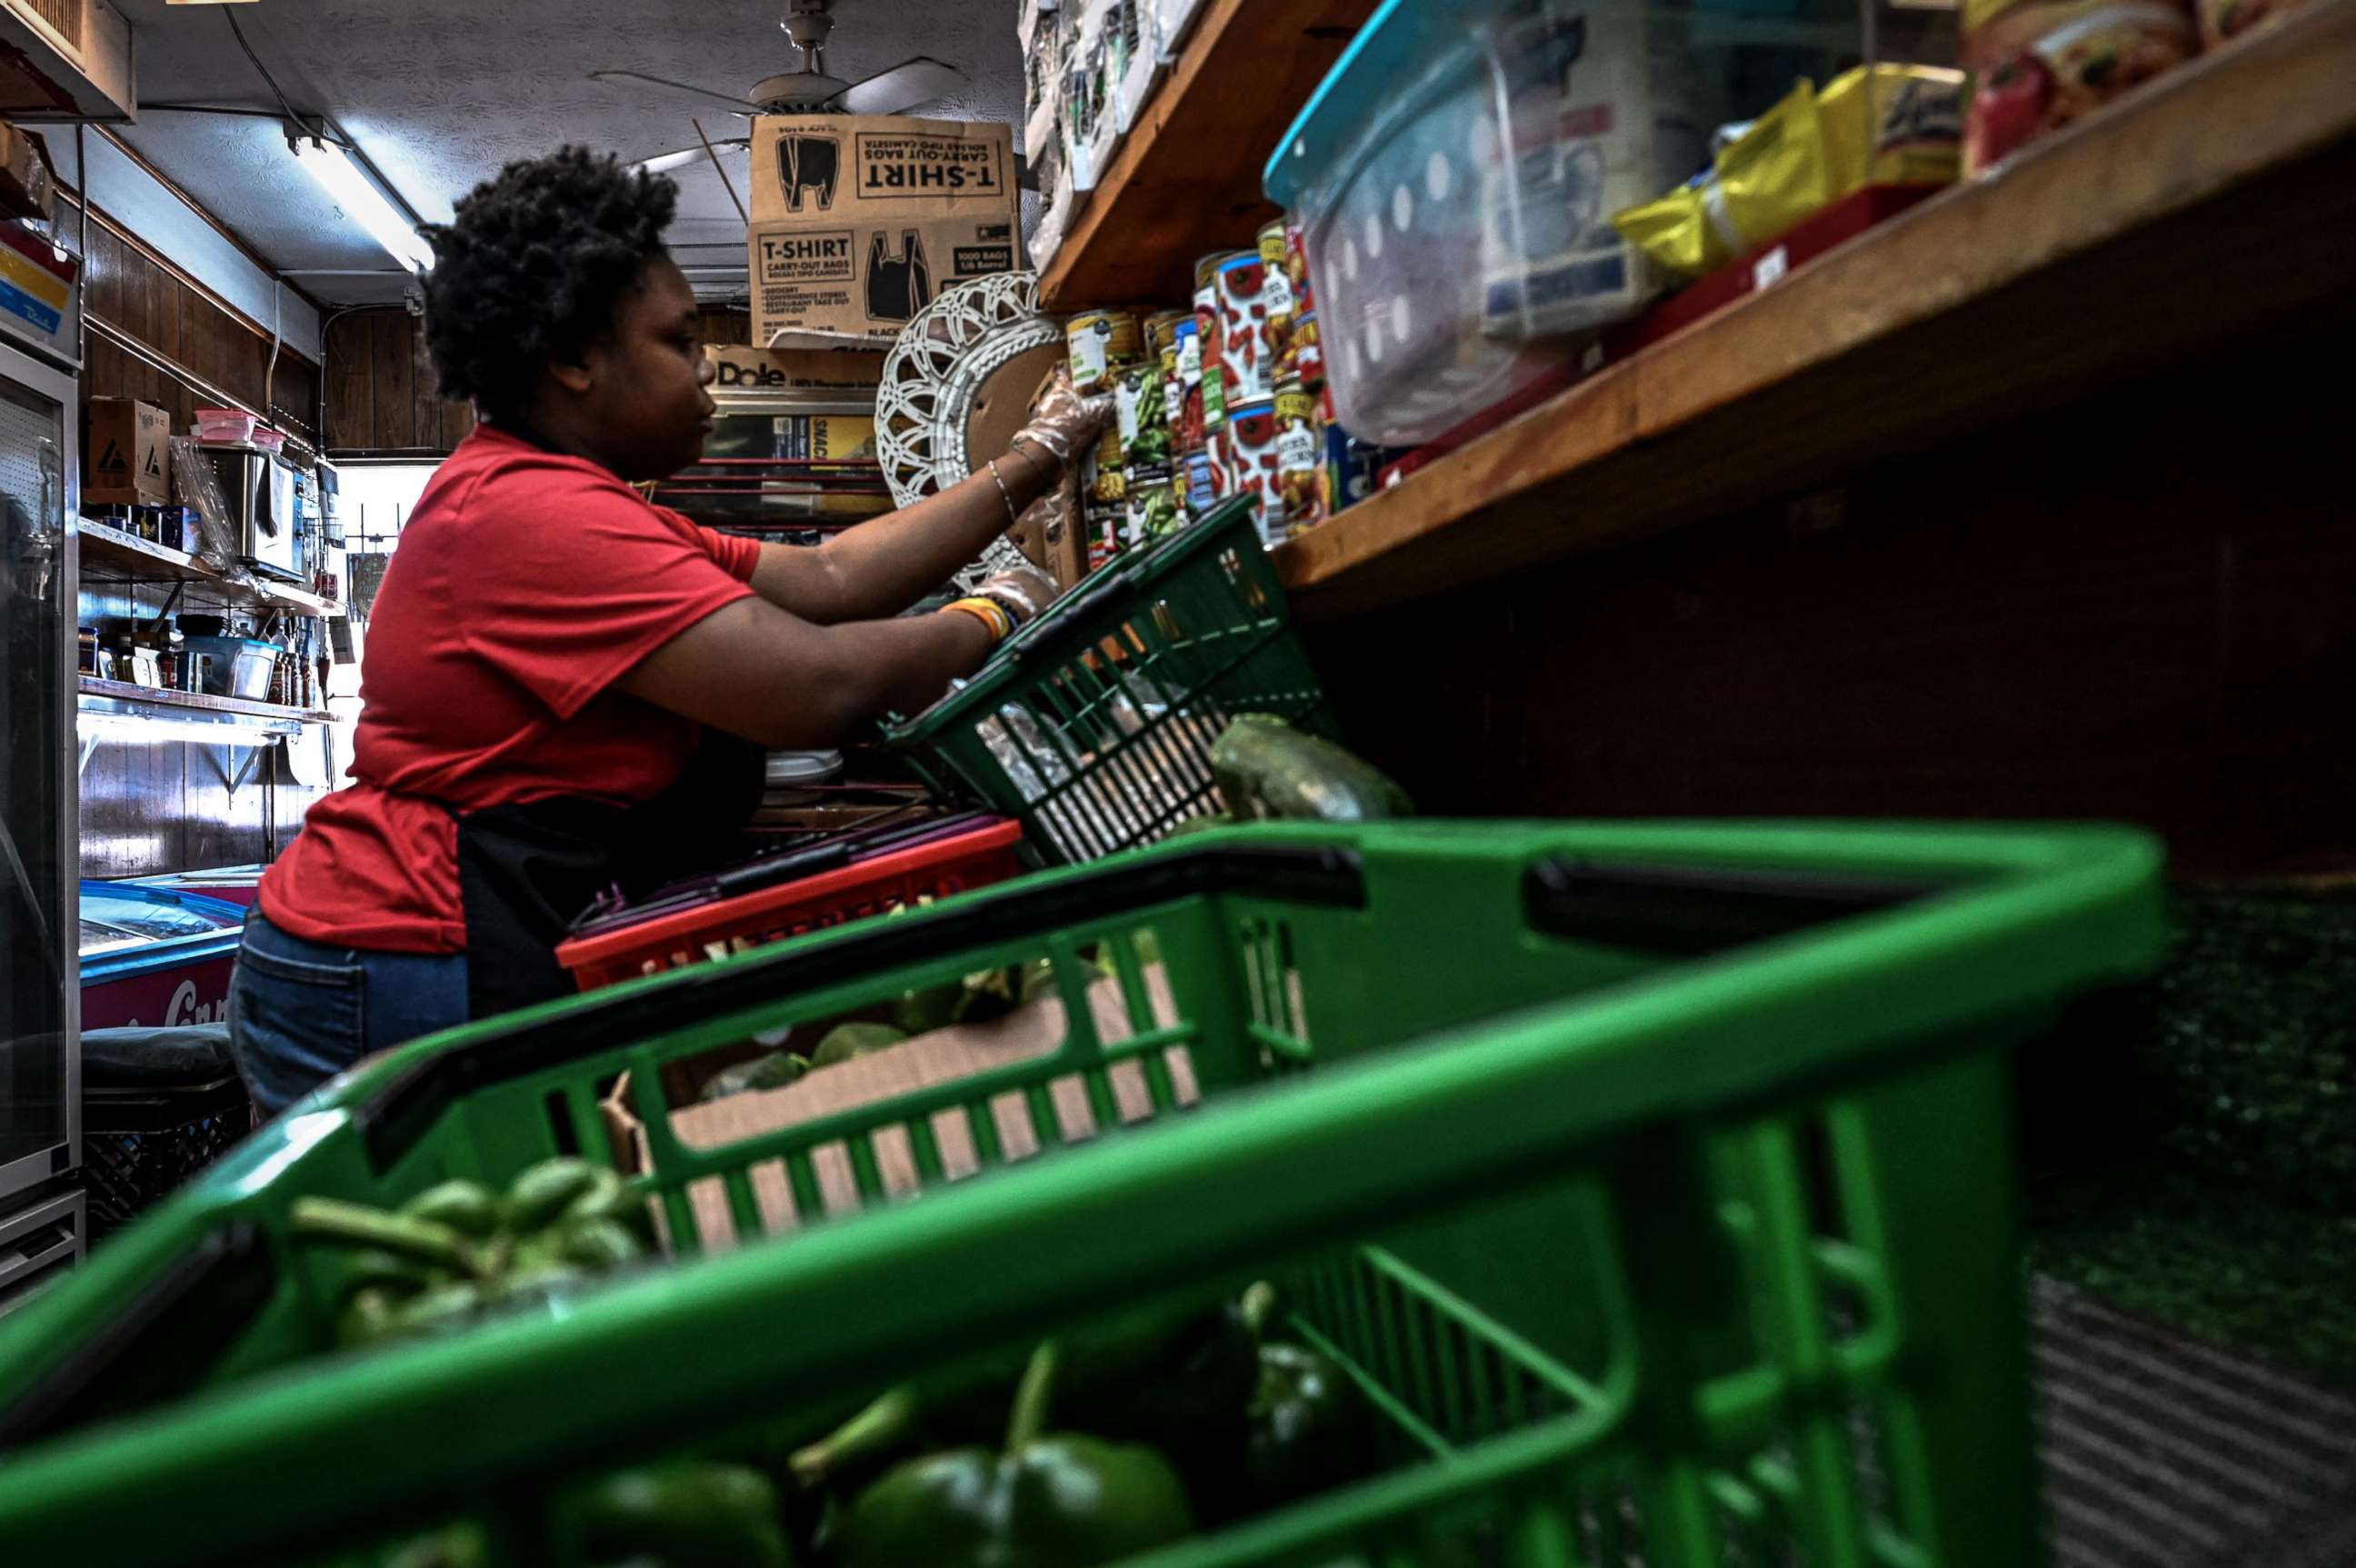 PHOTO: An employee stacks cans of food at a grocery store in the Moncrief Park neighborhood of Jacksonville, Florida, on October 14, 2022.